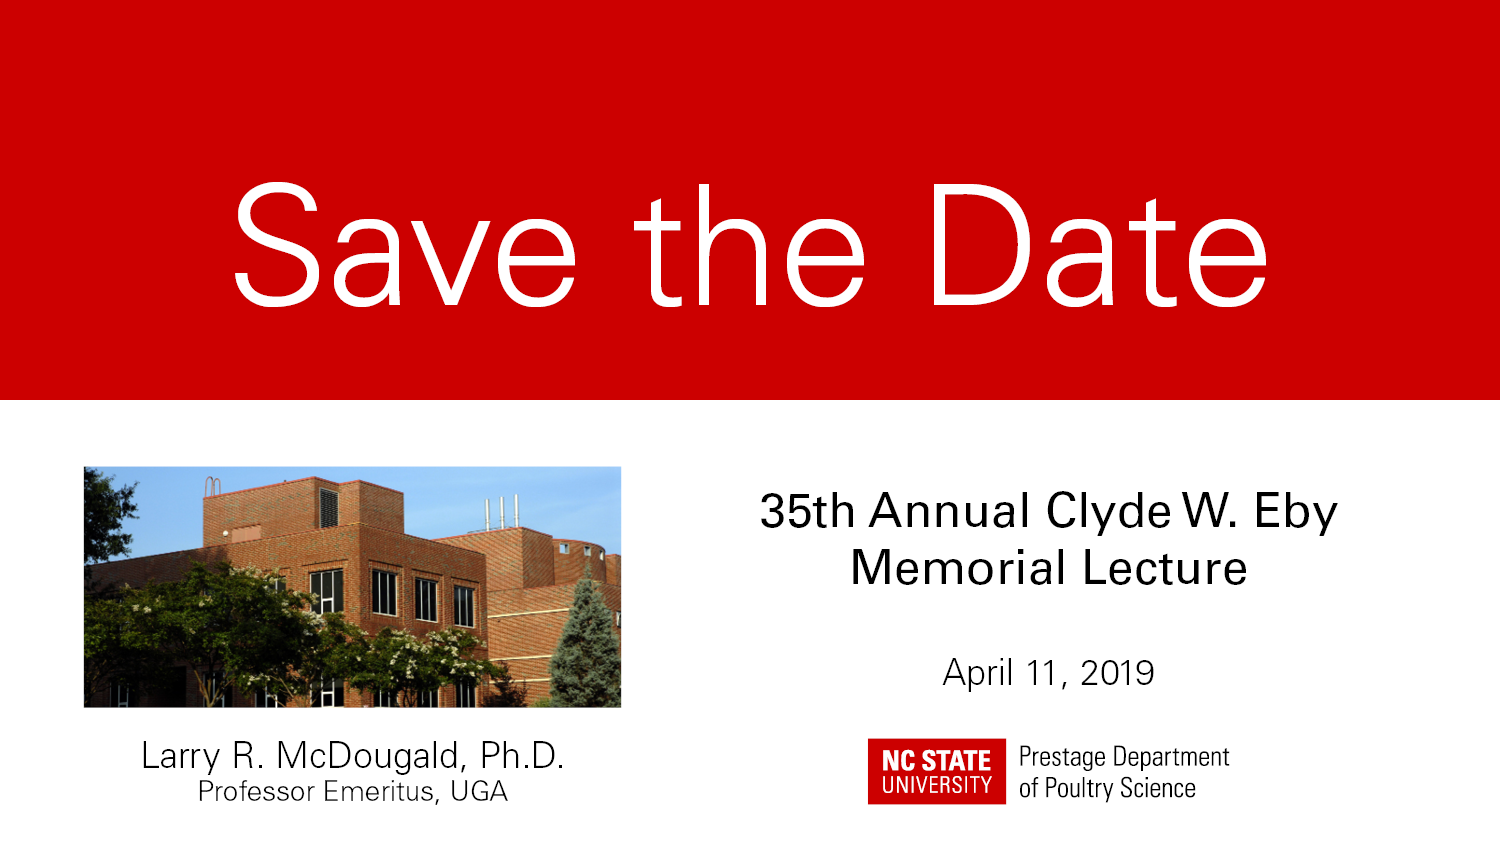 Save the Date card for the 35th Clyde W. Eby Lecture